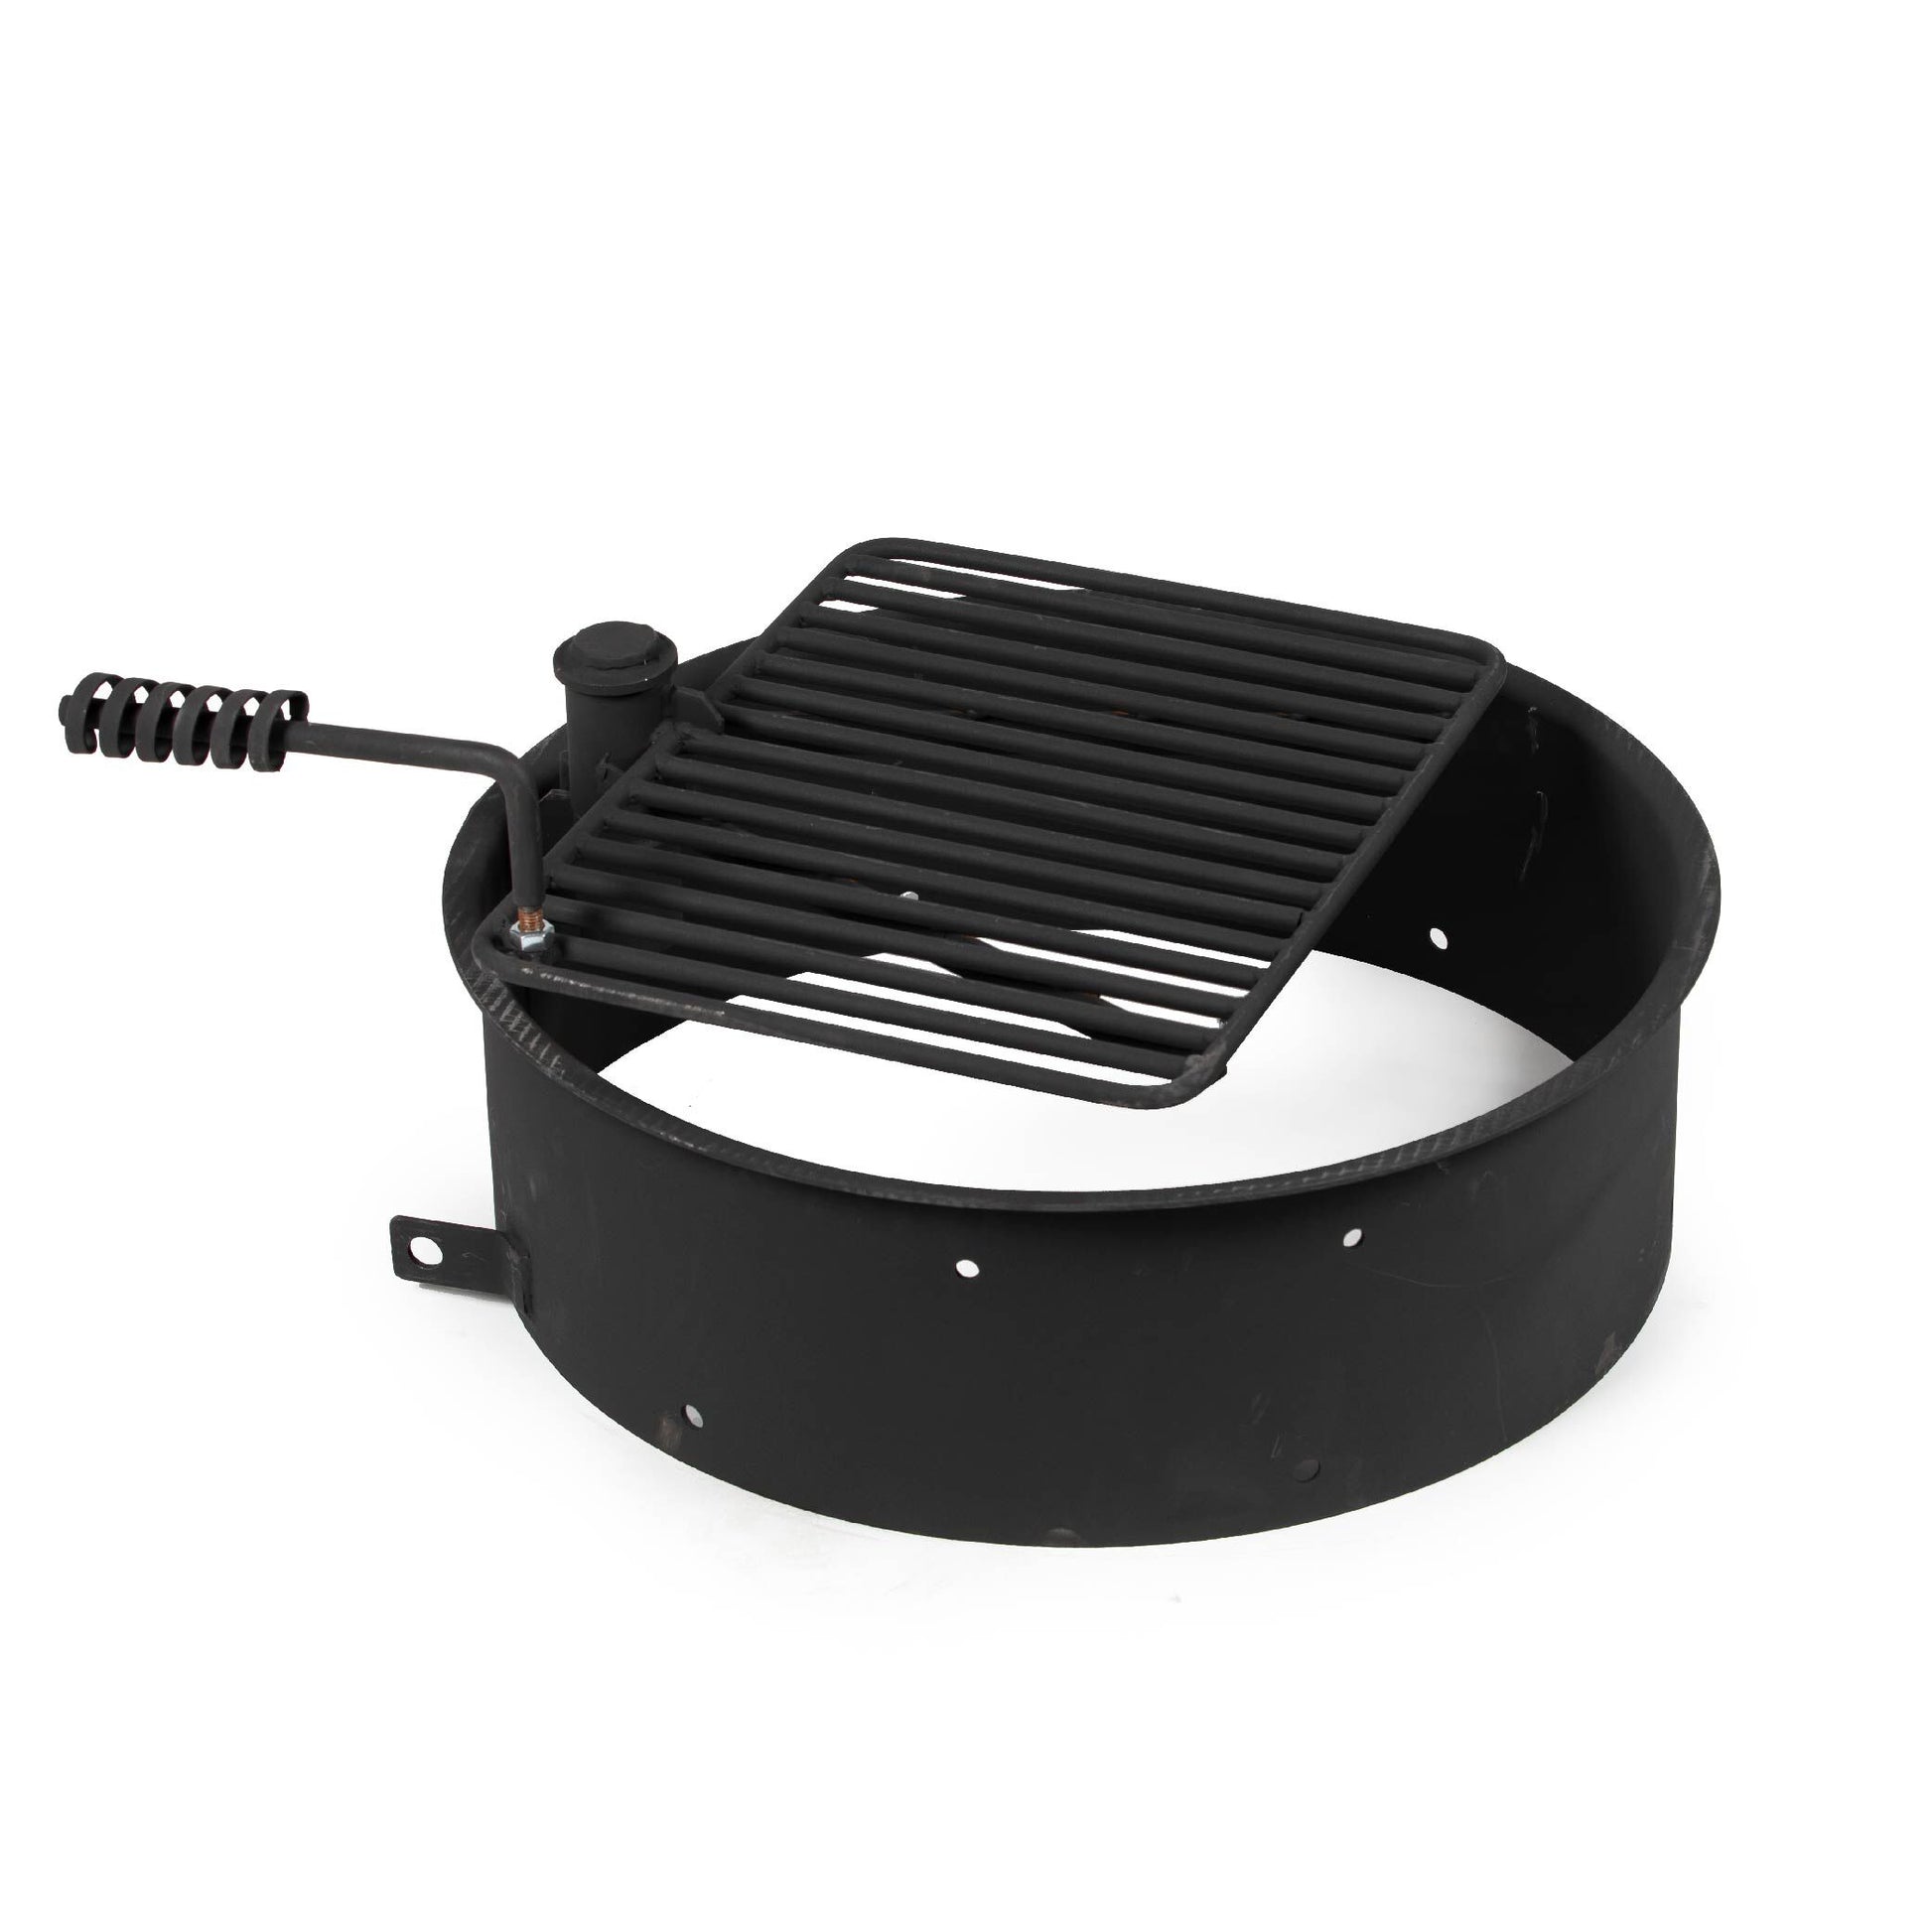 Steel Camp Fire Ring & Outdoor Cooking Grate - Fire Ring Size: 24" | 24"